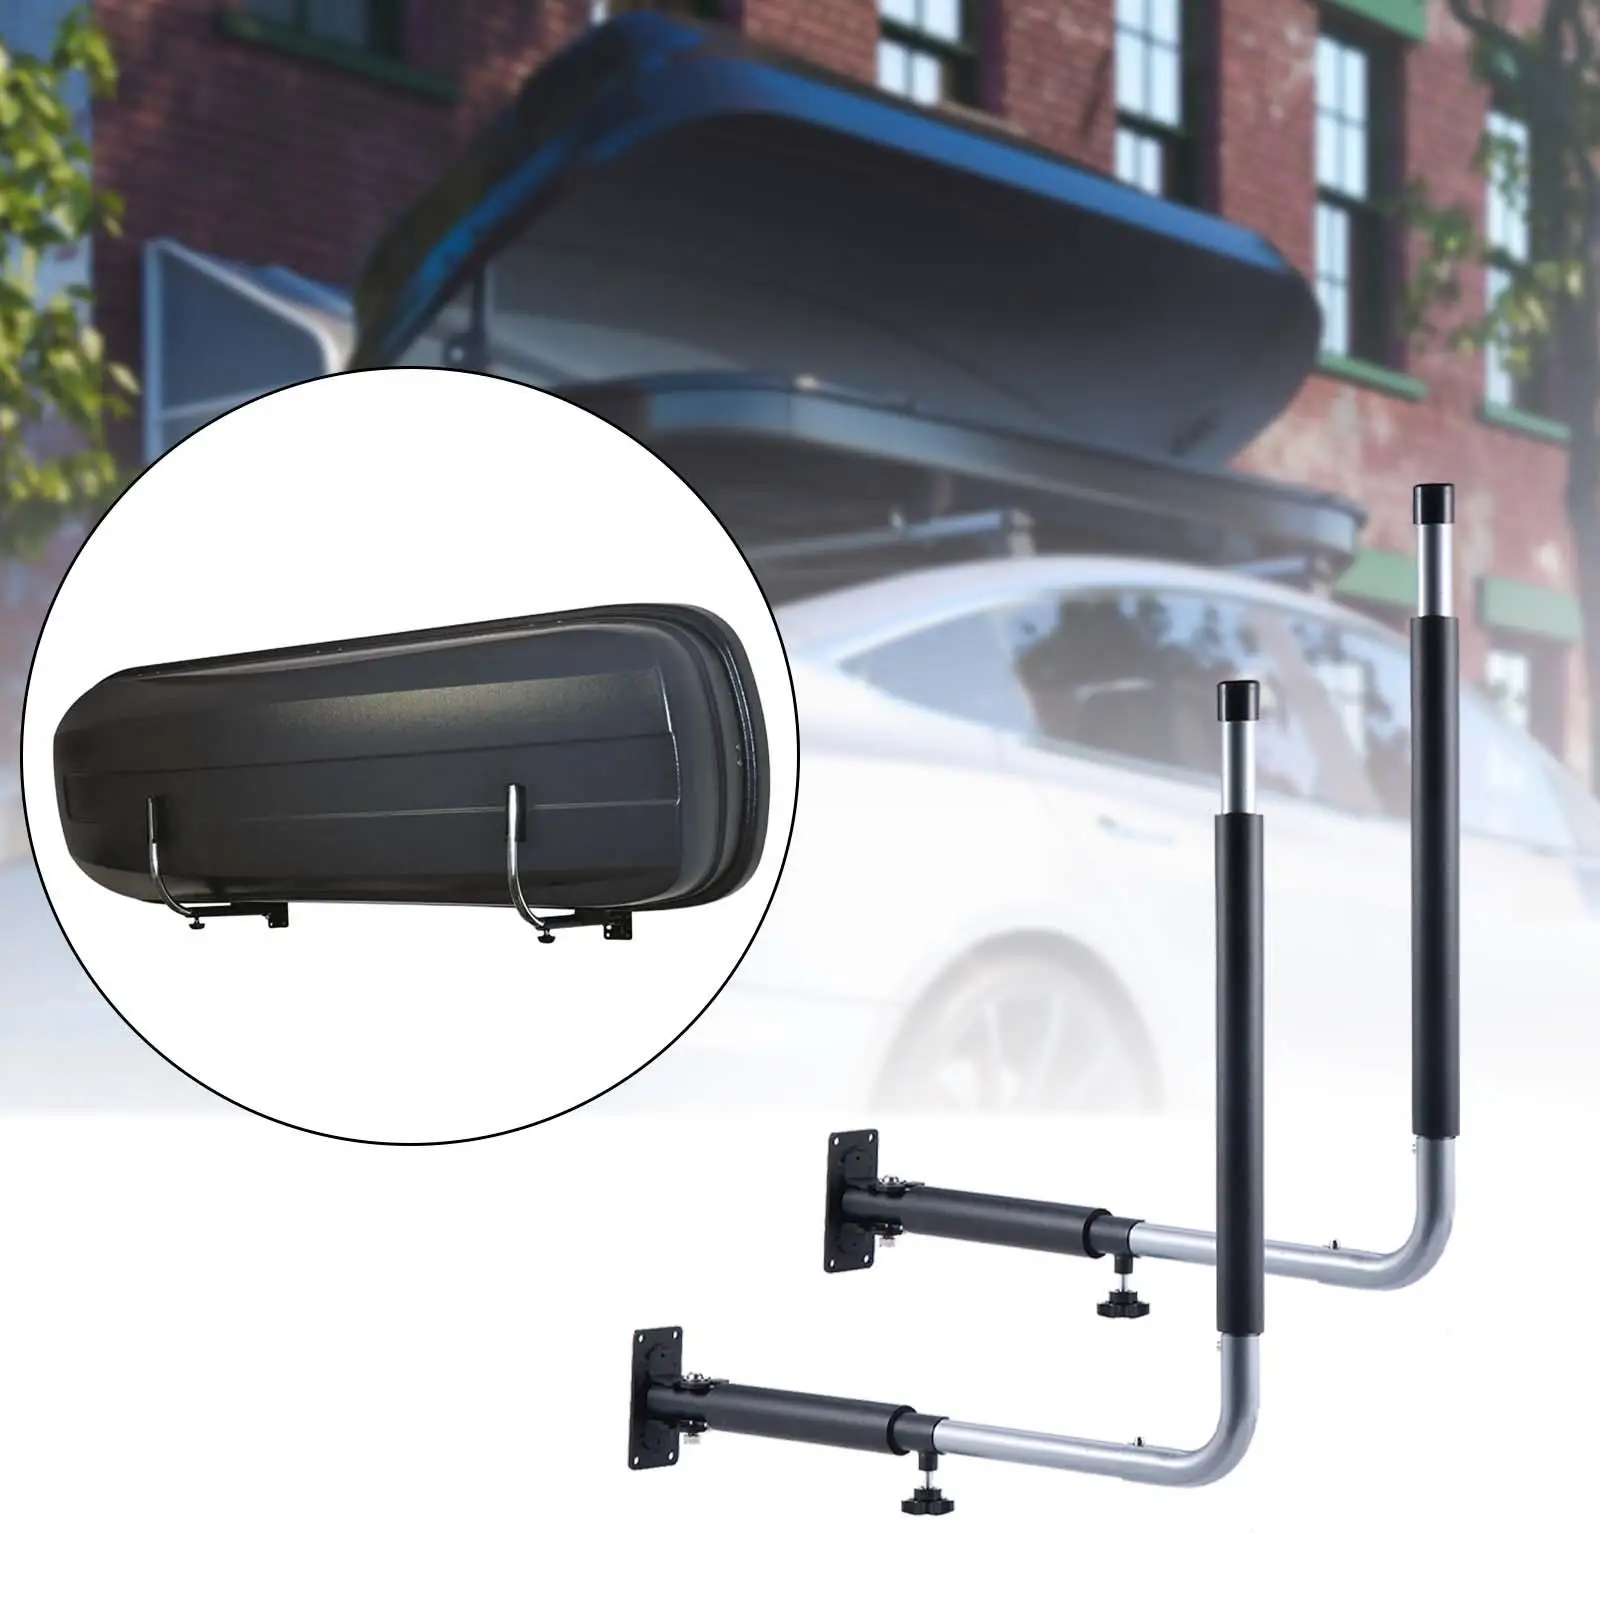 Foldable Kayak Storage Hook Car Roof Box Wall Mount Rack for Canoe Surfing Board